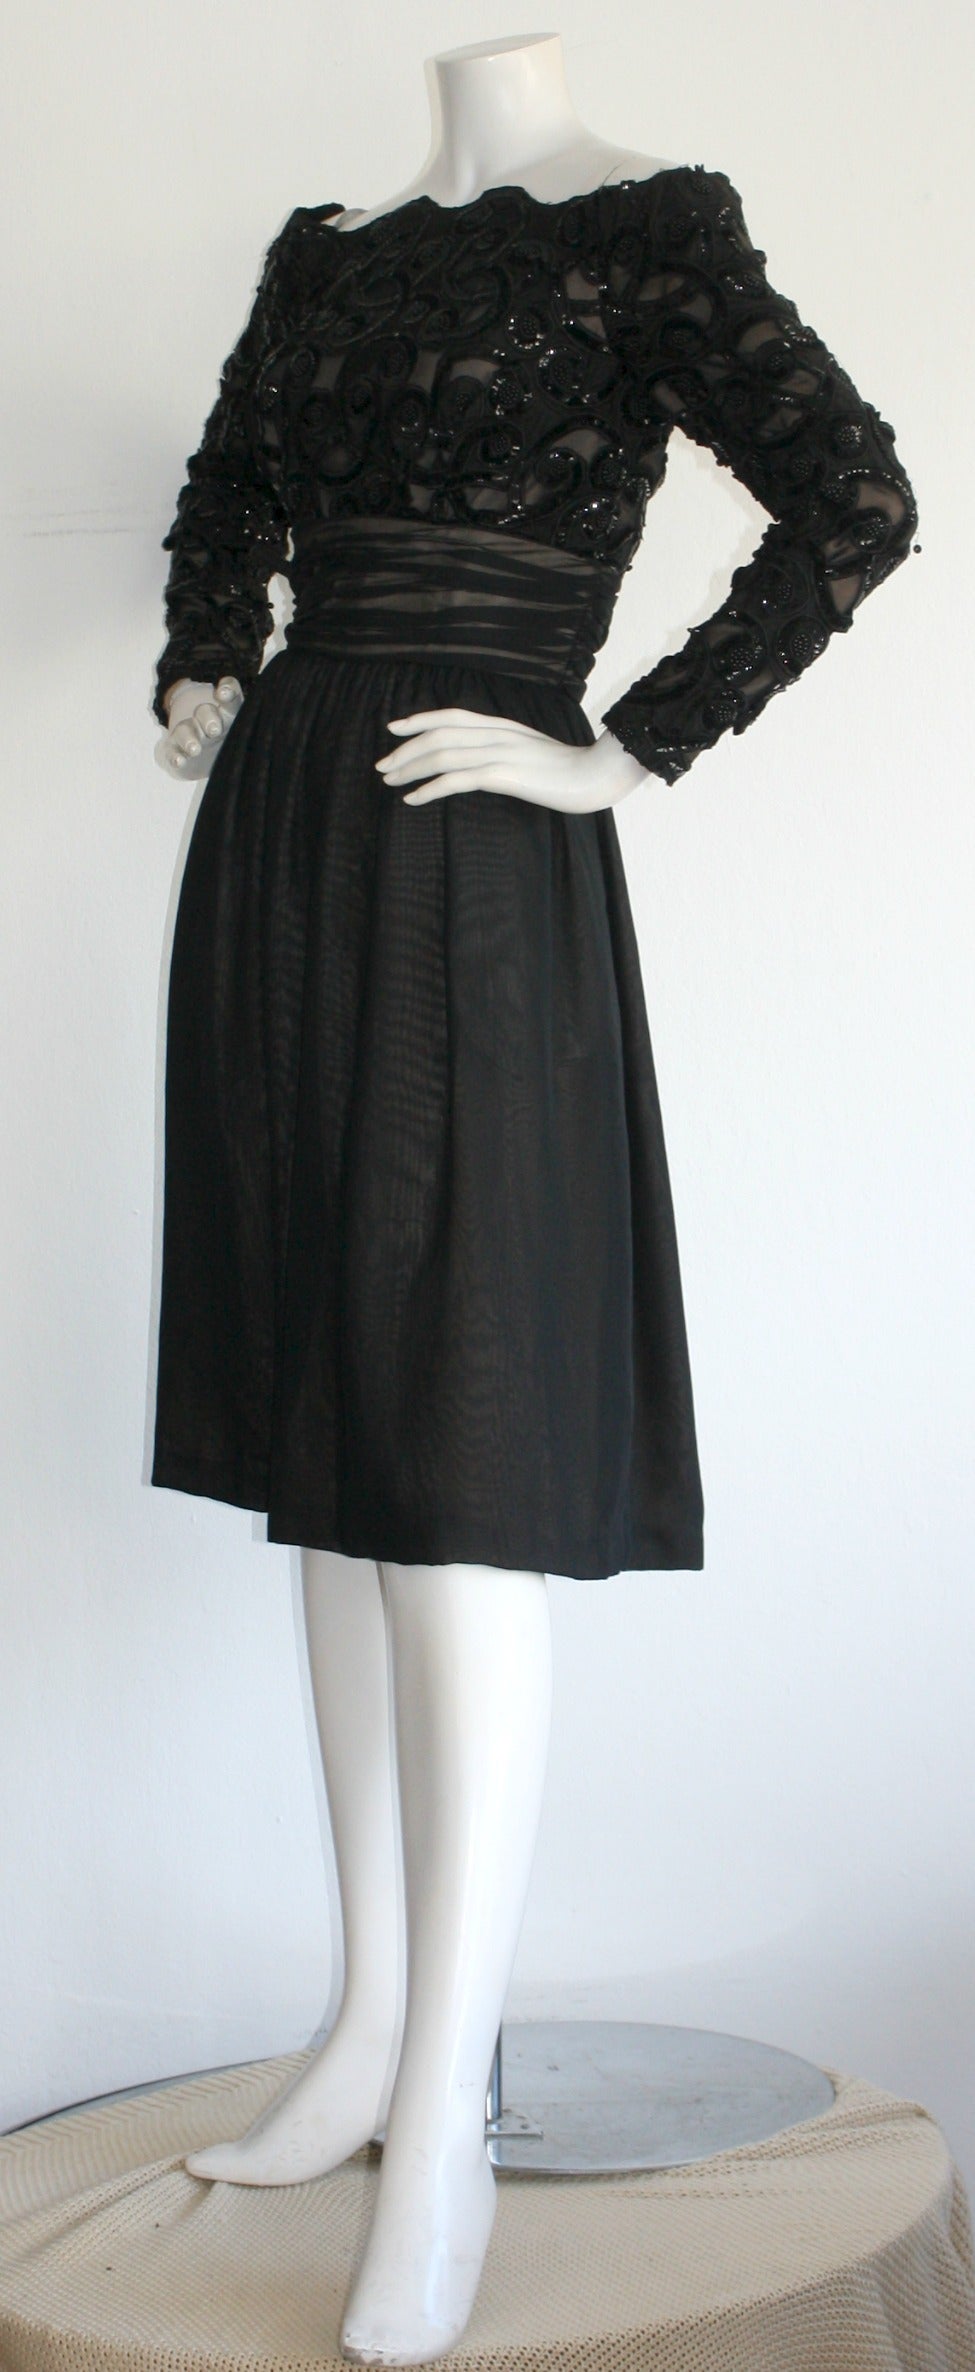 Striking vintage Kevan Hall Couture dress! Beautiful, intricate sequin detail against black chiffon. Sexy off-shoulder arms, with a nice chiffon skirt. Such a chic black dress! Fully lined. In great condition. Approximately Size